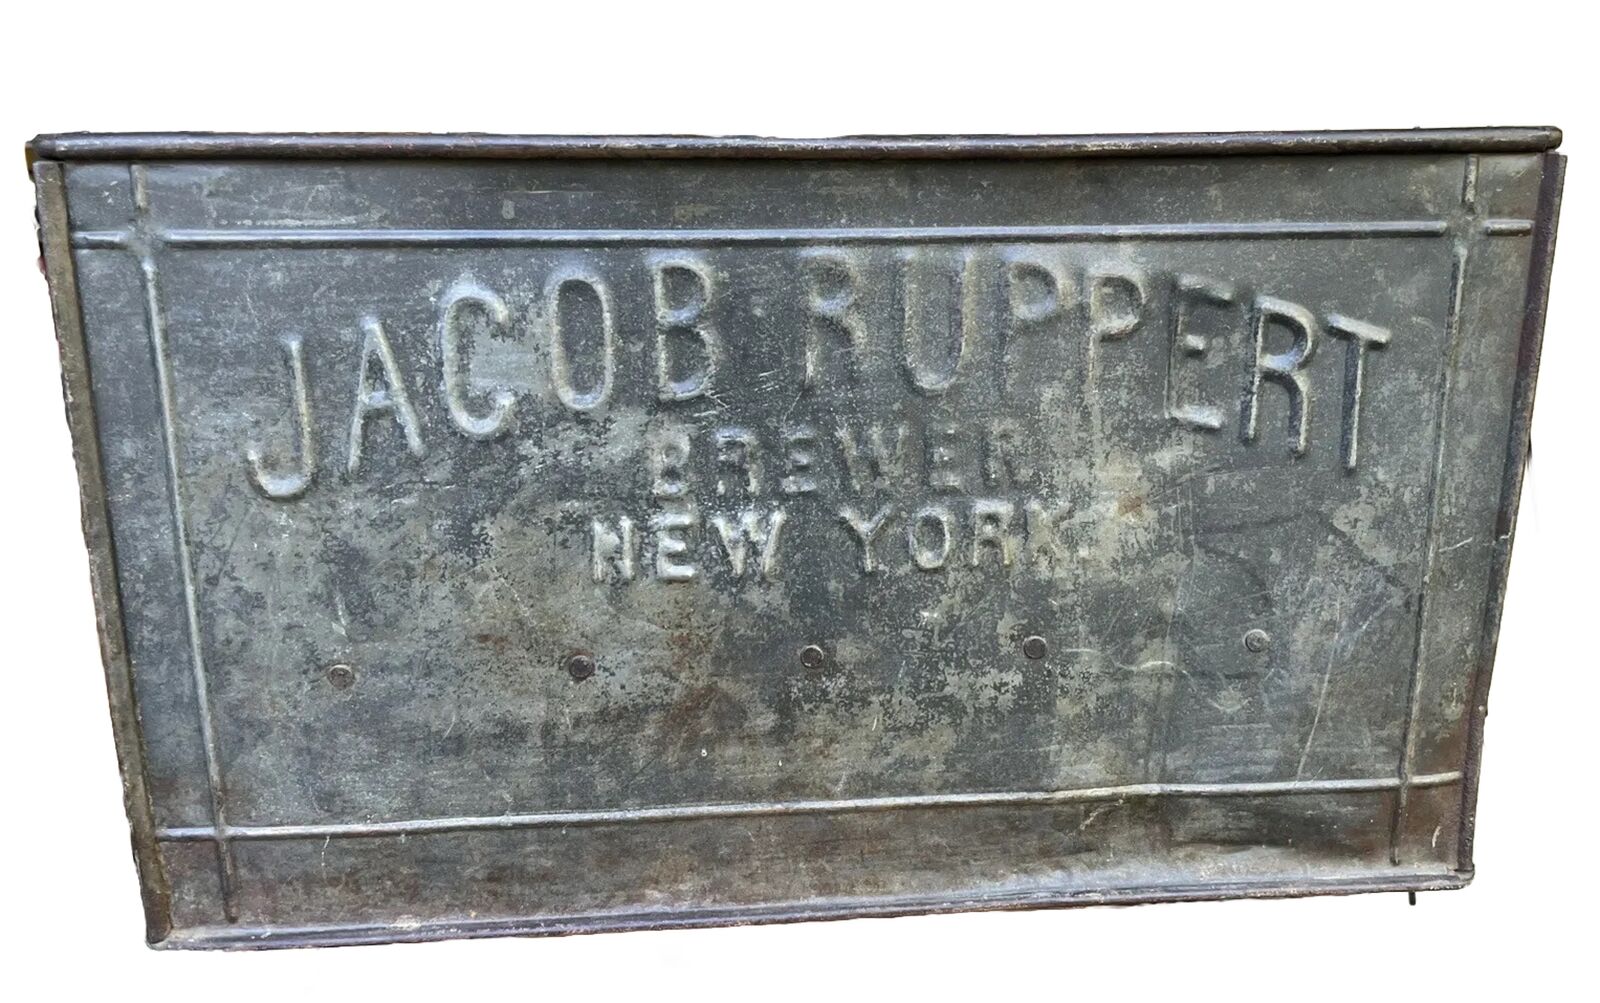 RARE Vintage 1918 Metal Beer Box Crate Jacob ruppert brewing New York Antique